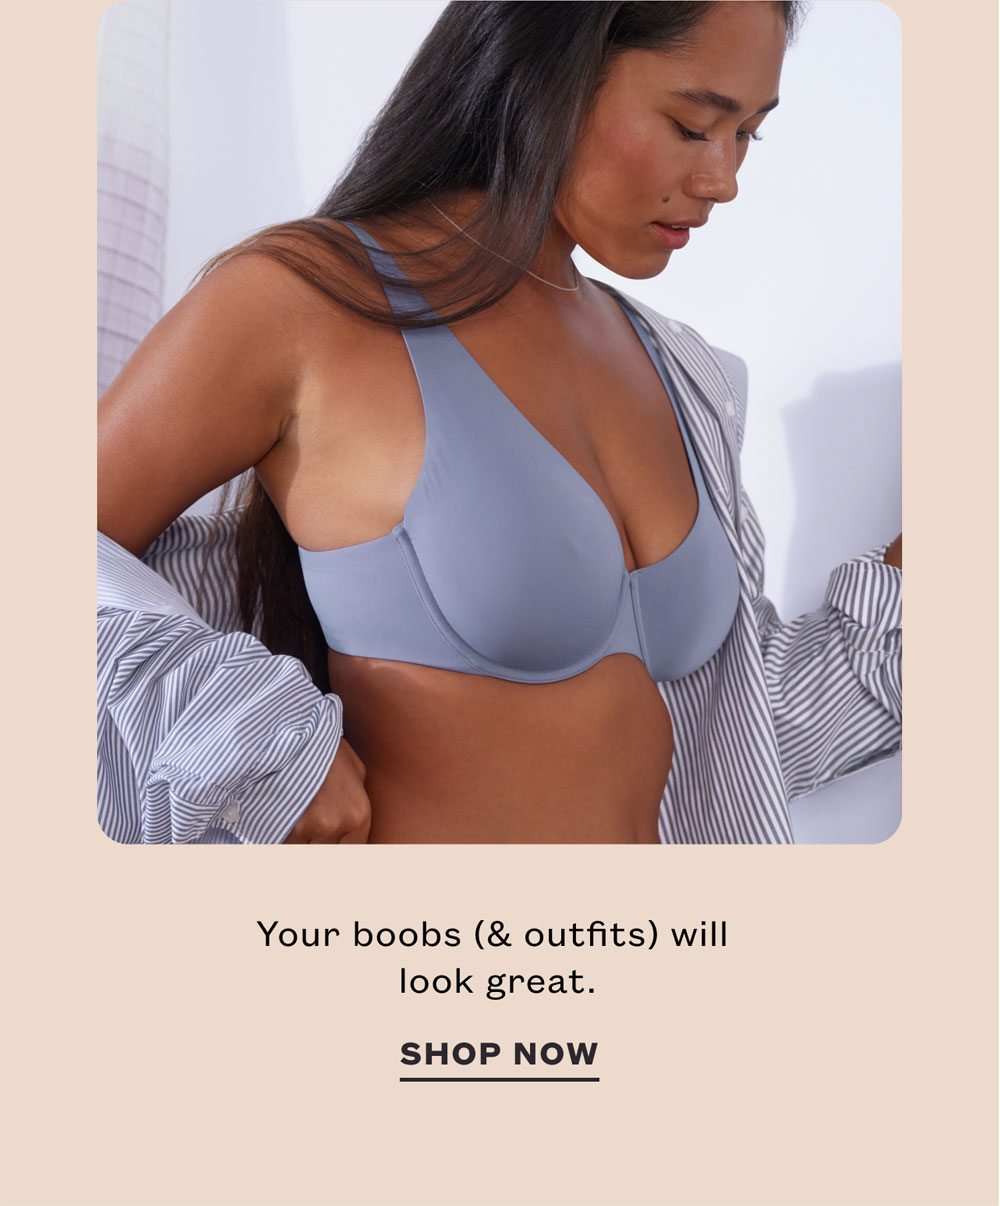 Your boobs (& outfits) will look great. SHOP NOW.